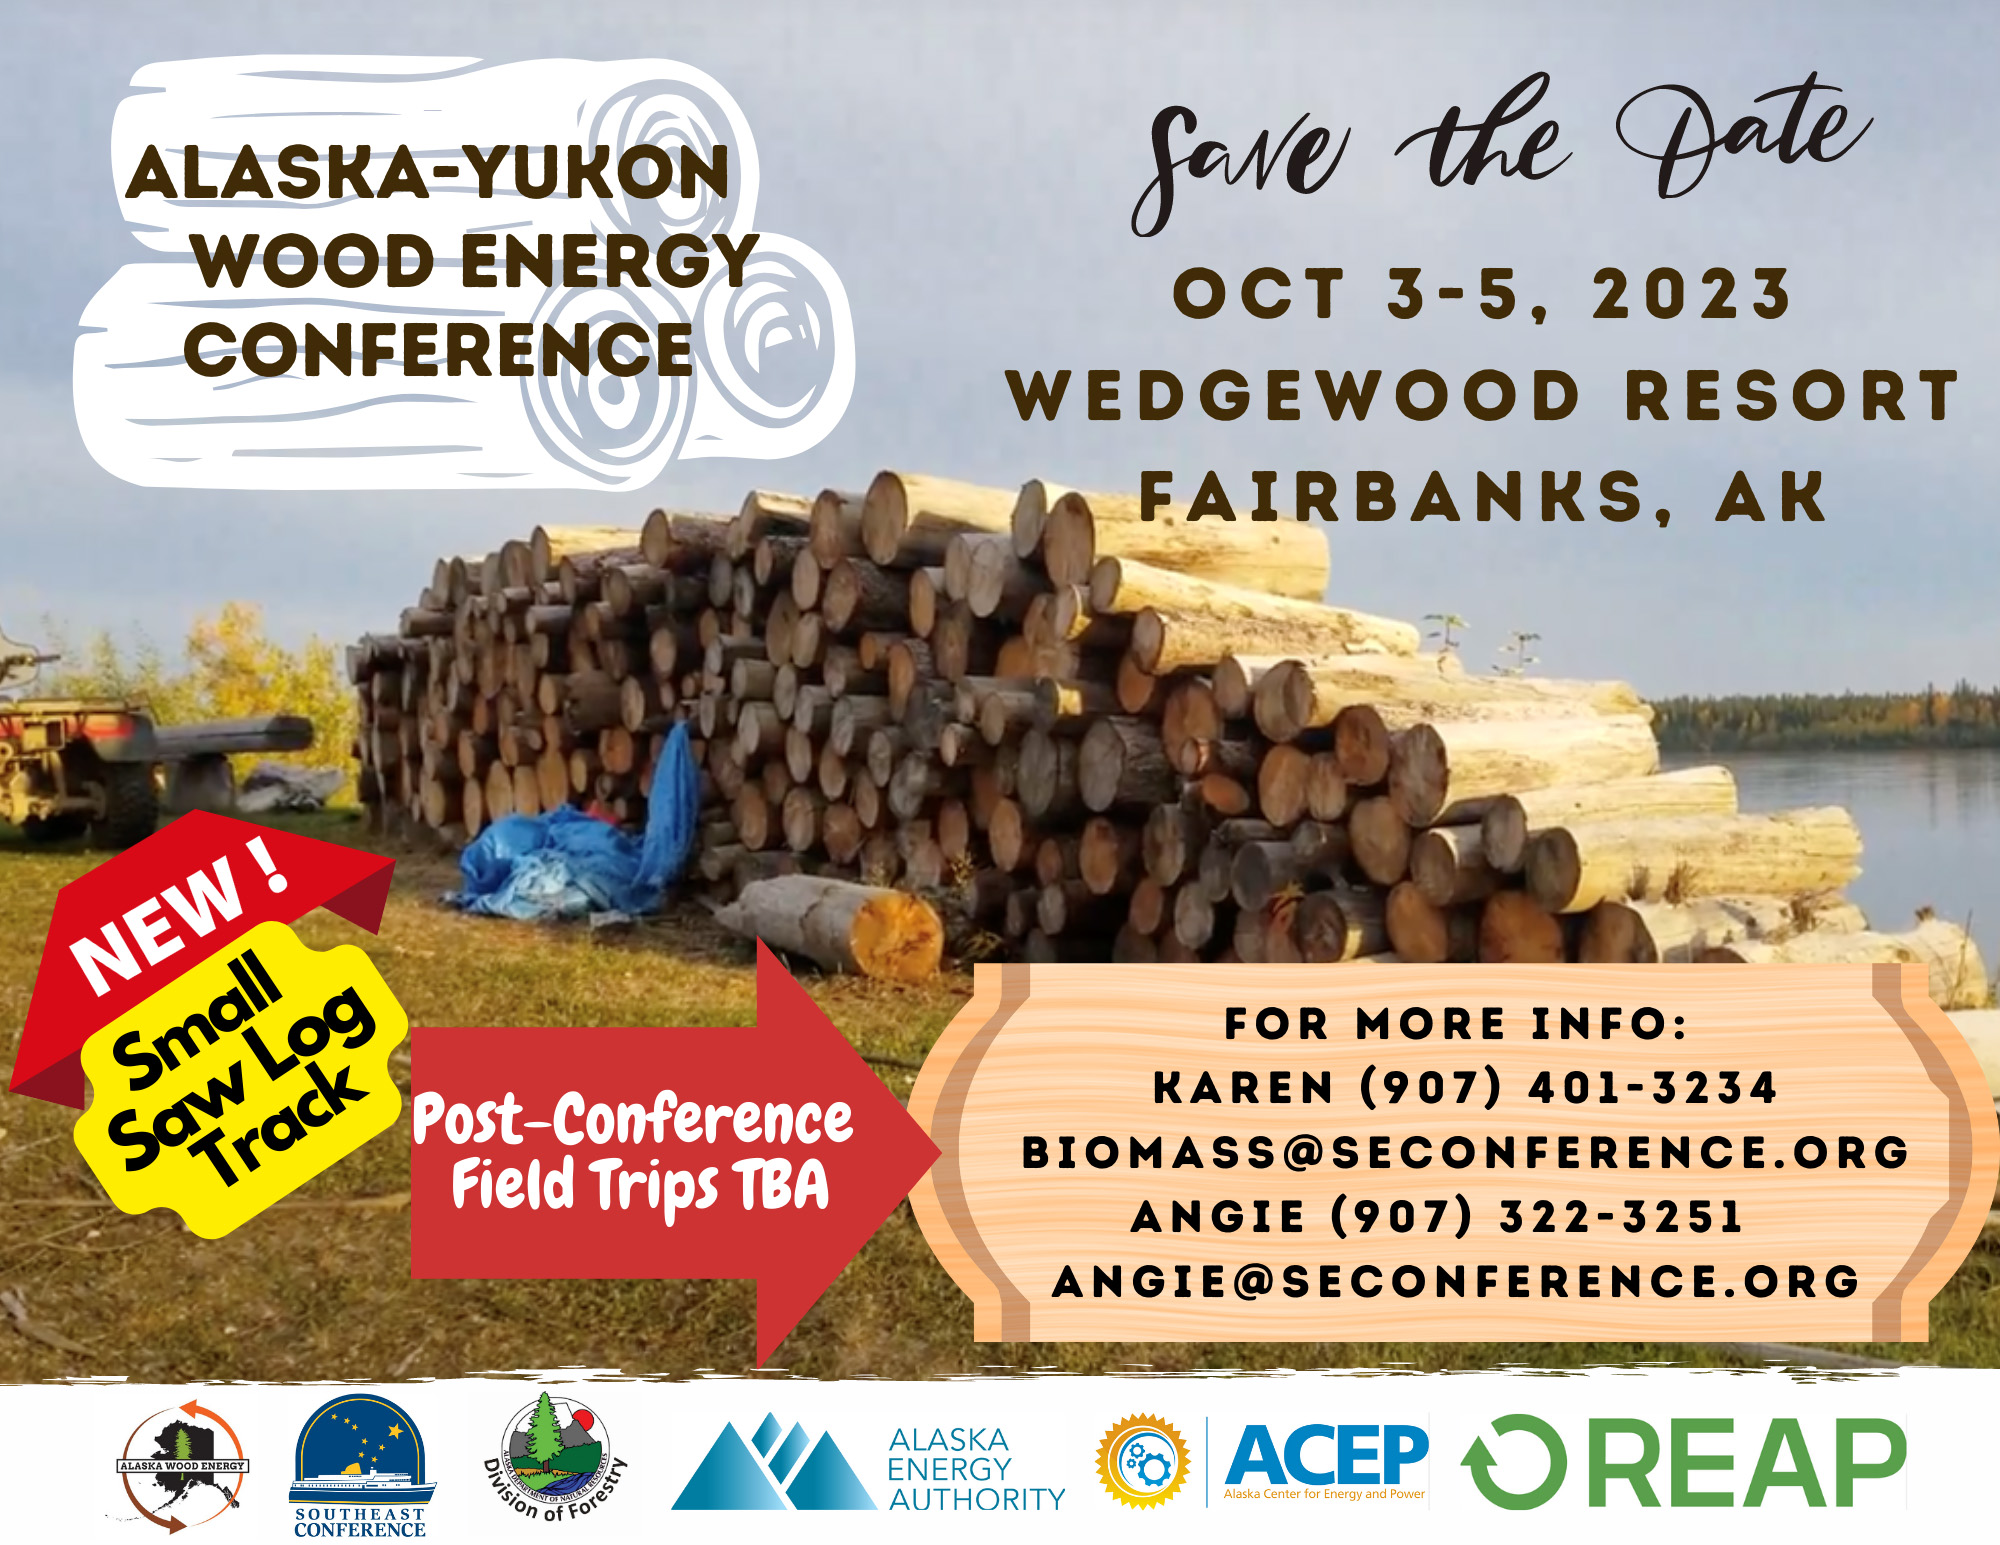 Save the Date for the 2023 Alaska-Yukon Wood Energy Conference